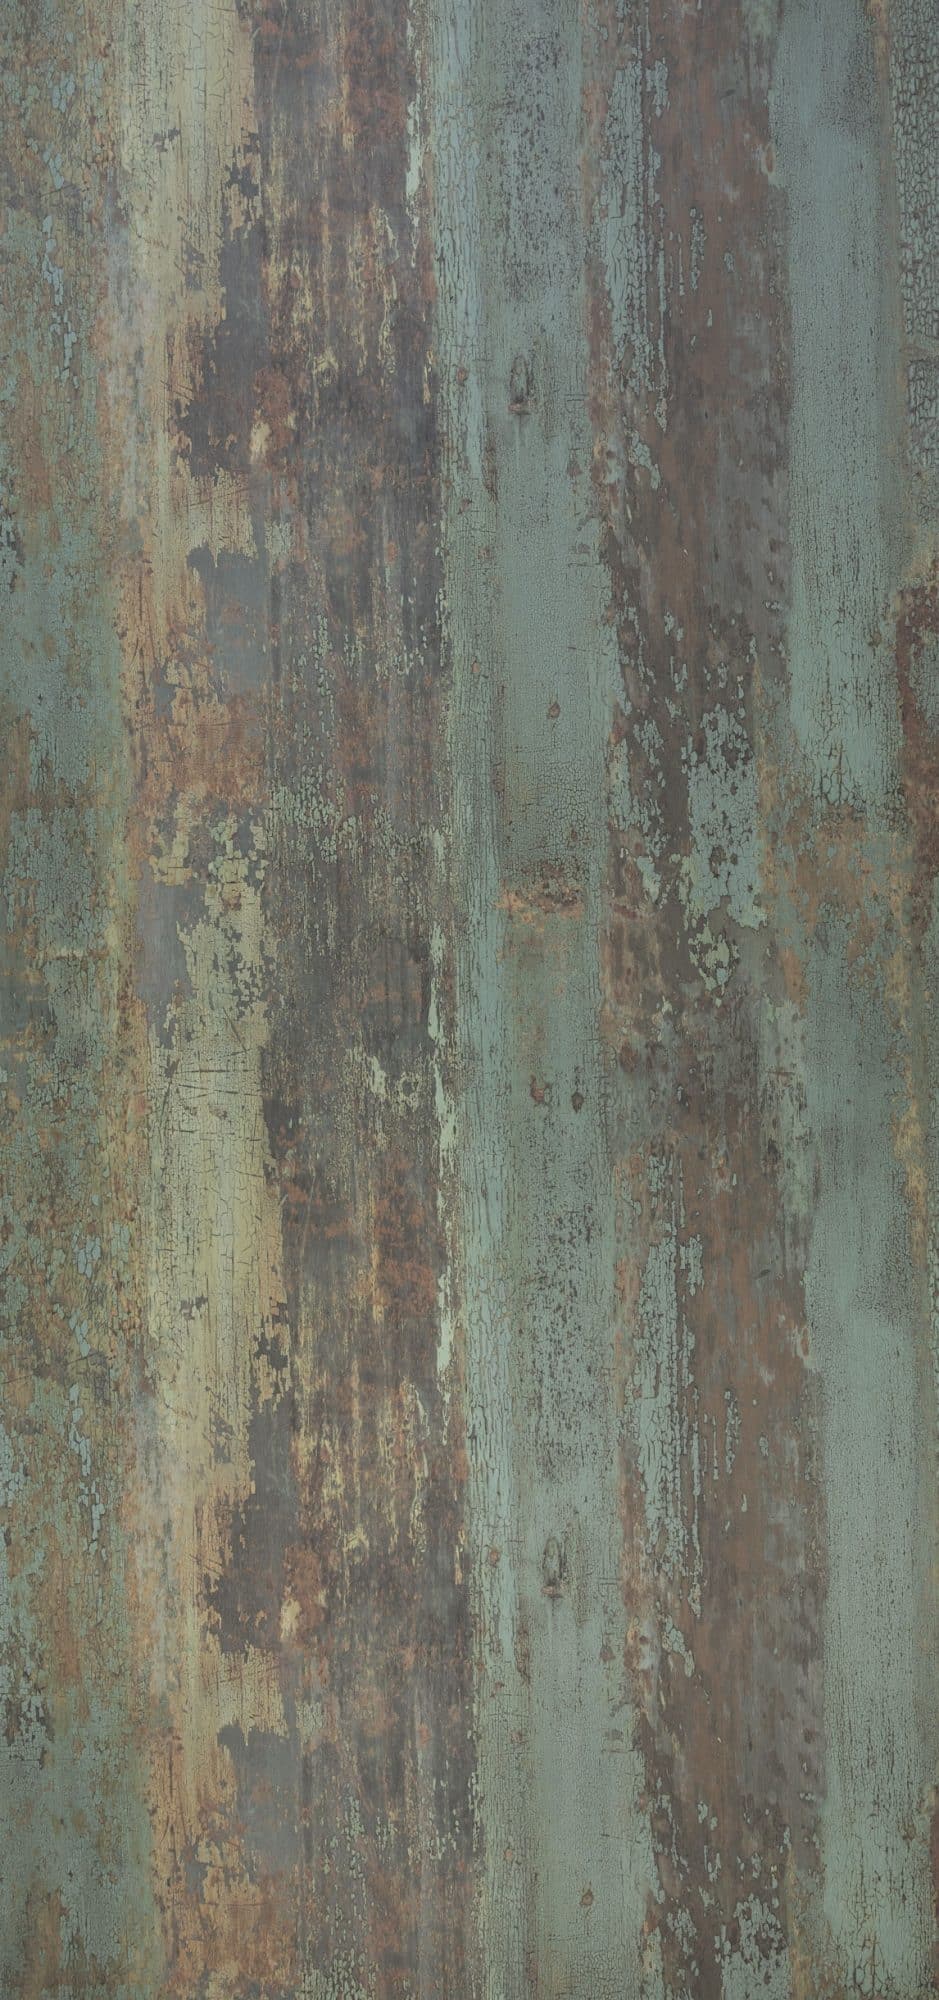 DecoLegno - HPL Specials - By Nature/Forest Green 2440x1220mm